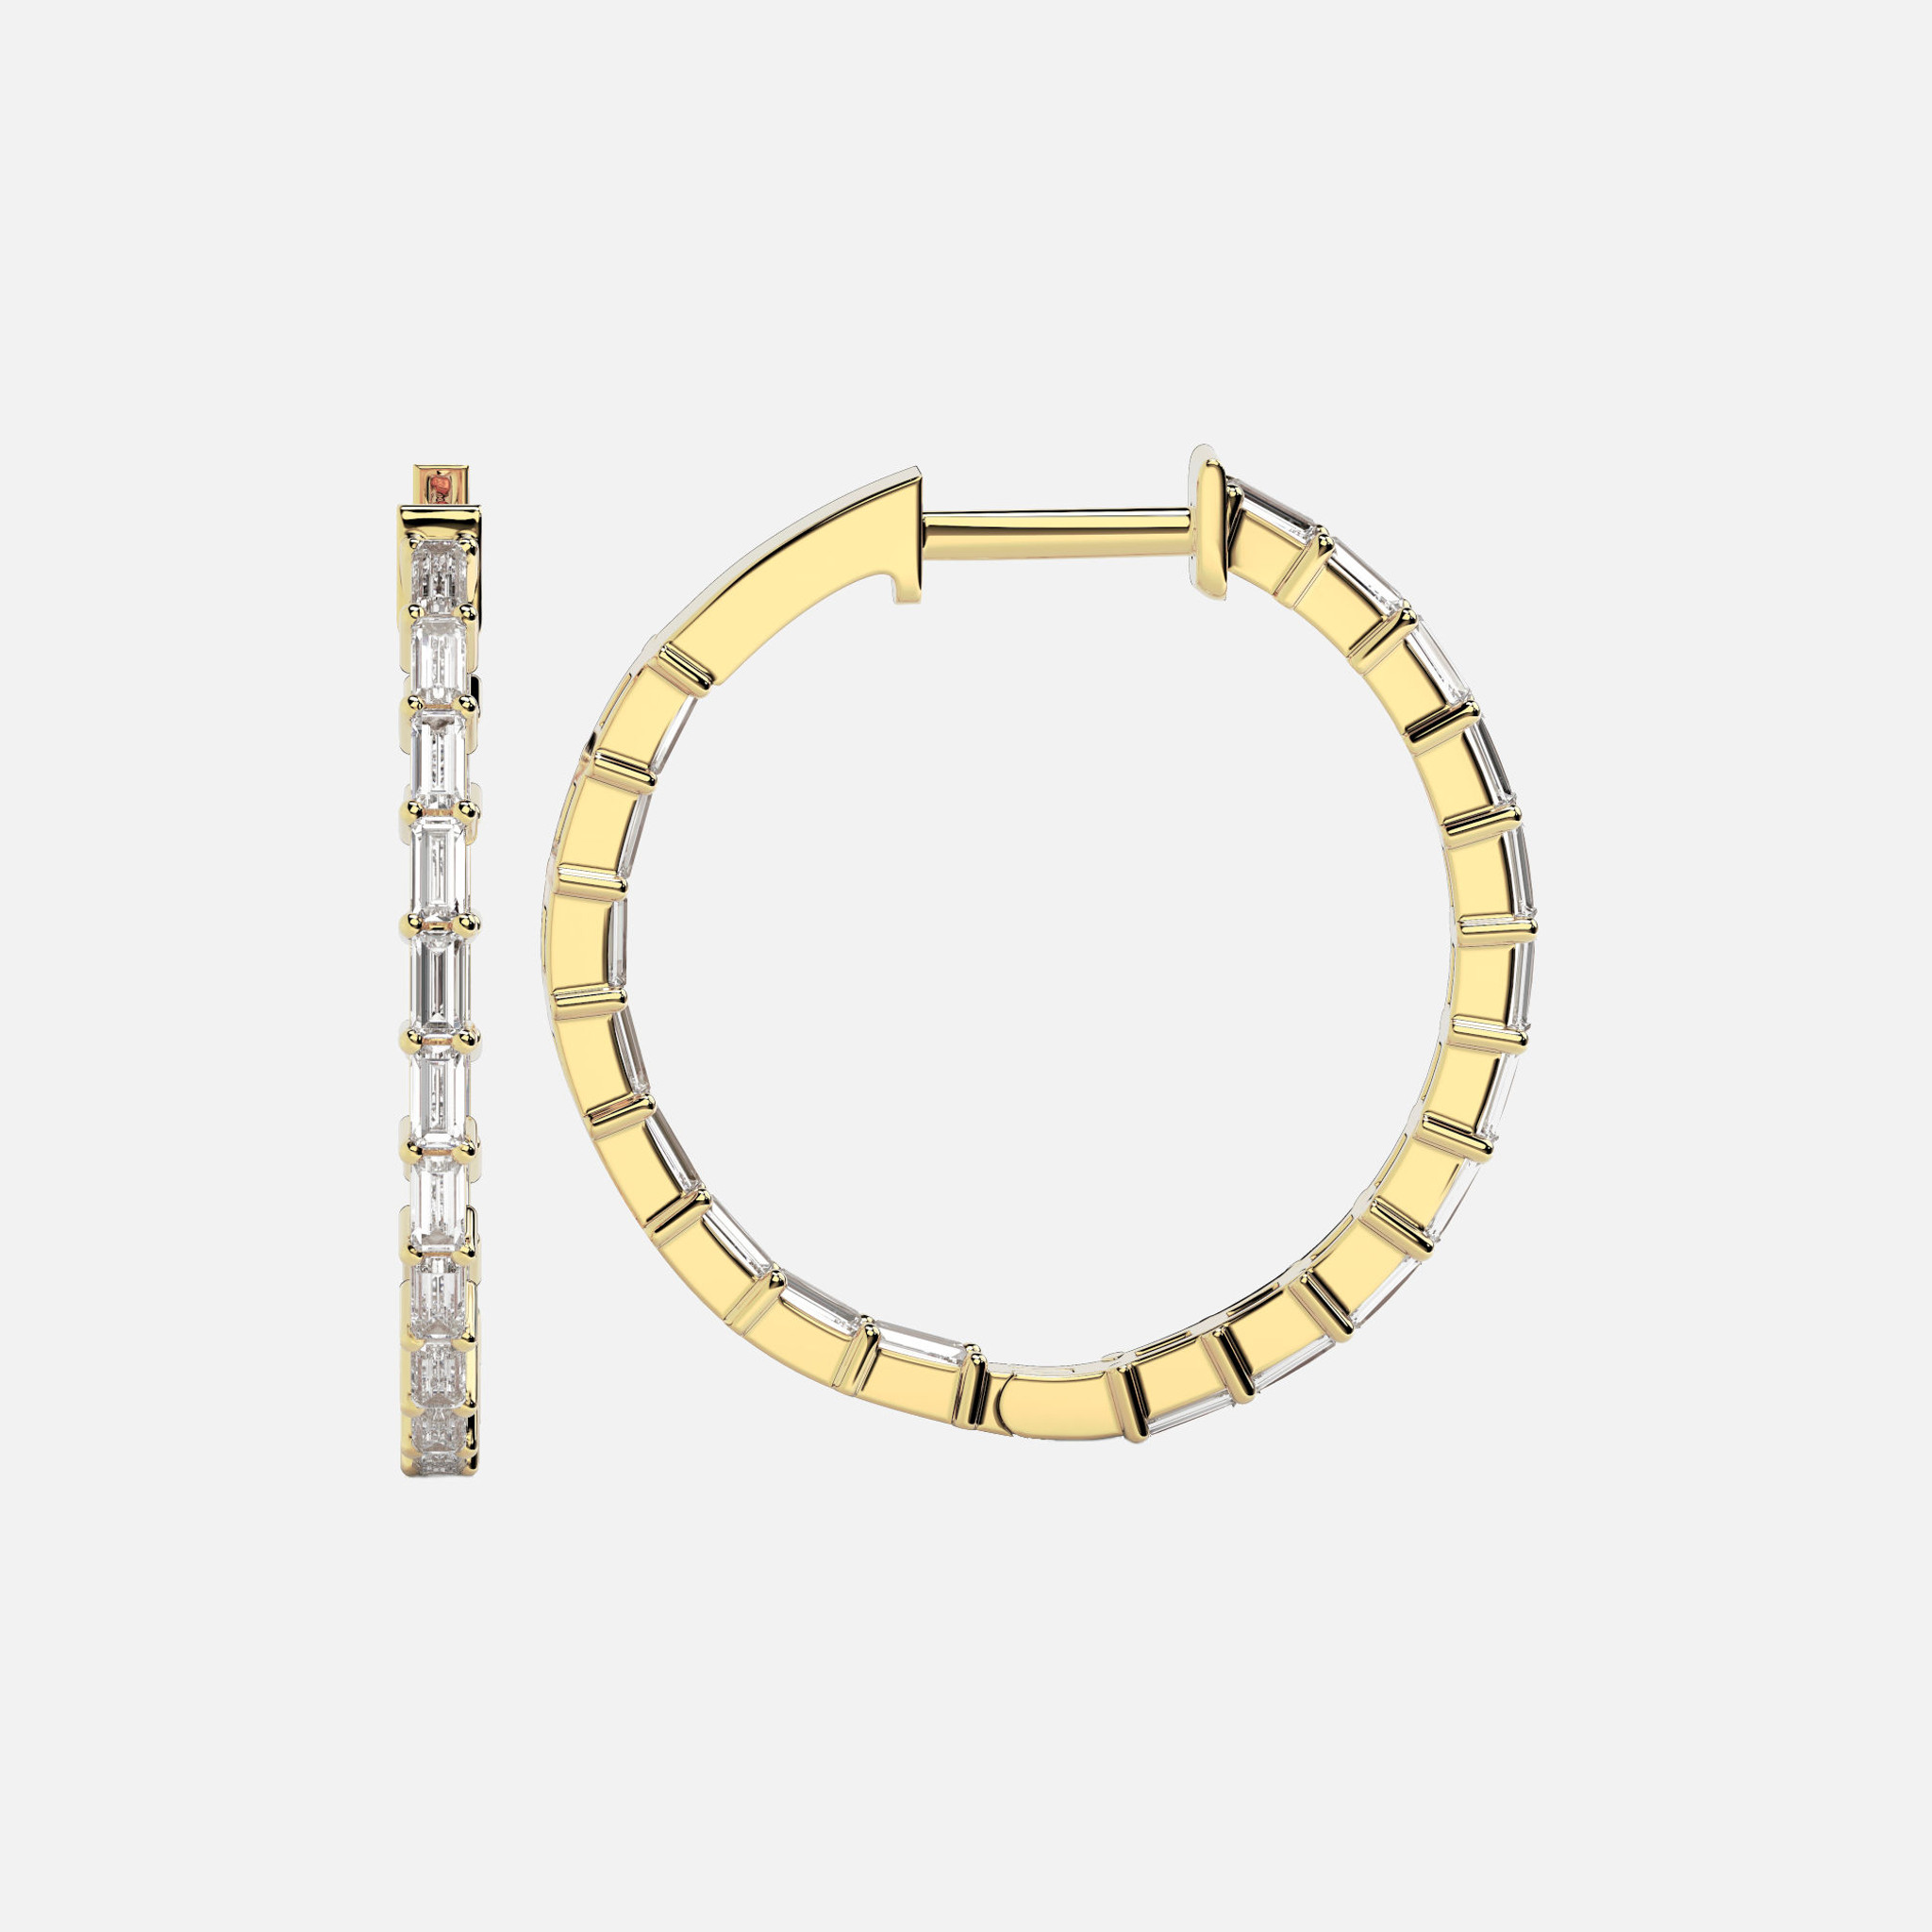 Inside Out Diamond Hoop Earrings: Handcrafted in 18k gold with dainty baguette cut diamonds set on the inside of the hoop, creating a captivating play of light with every head turn.